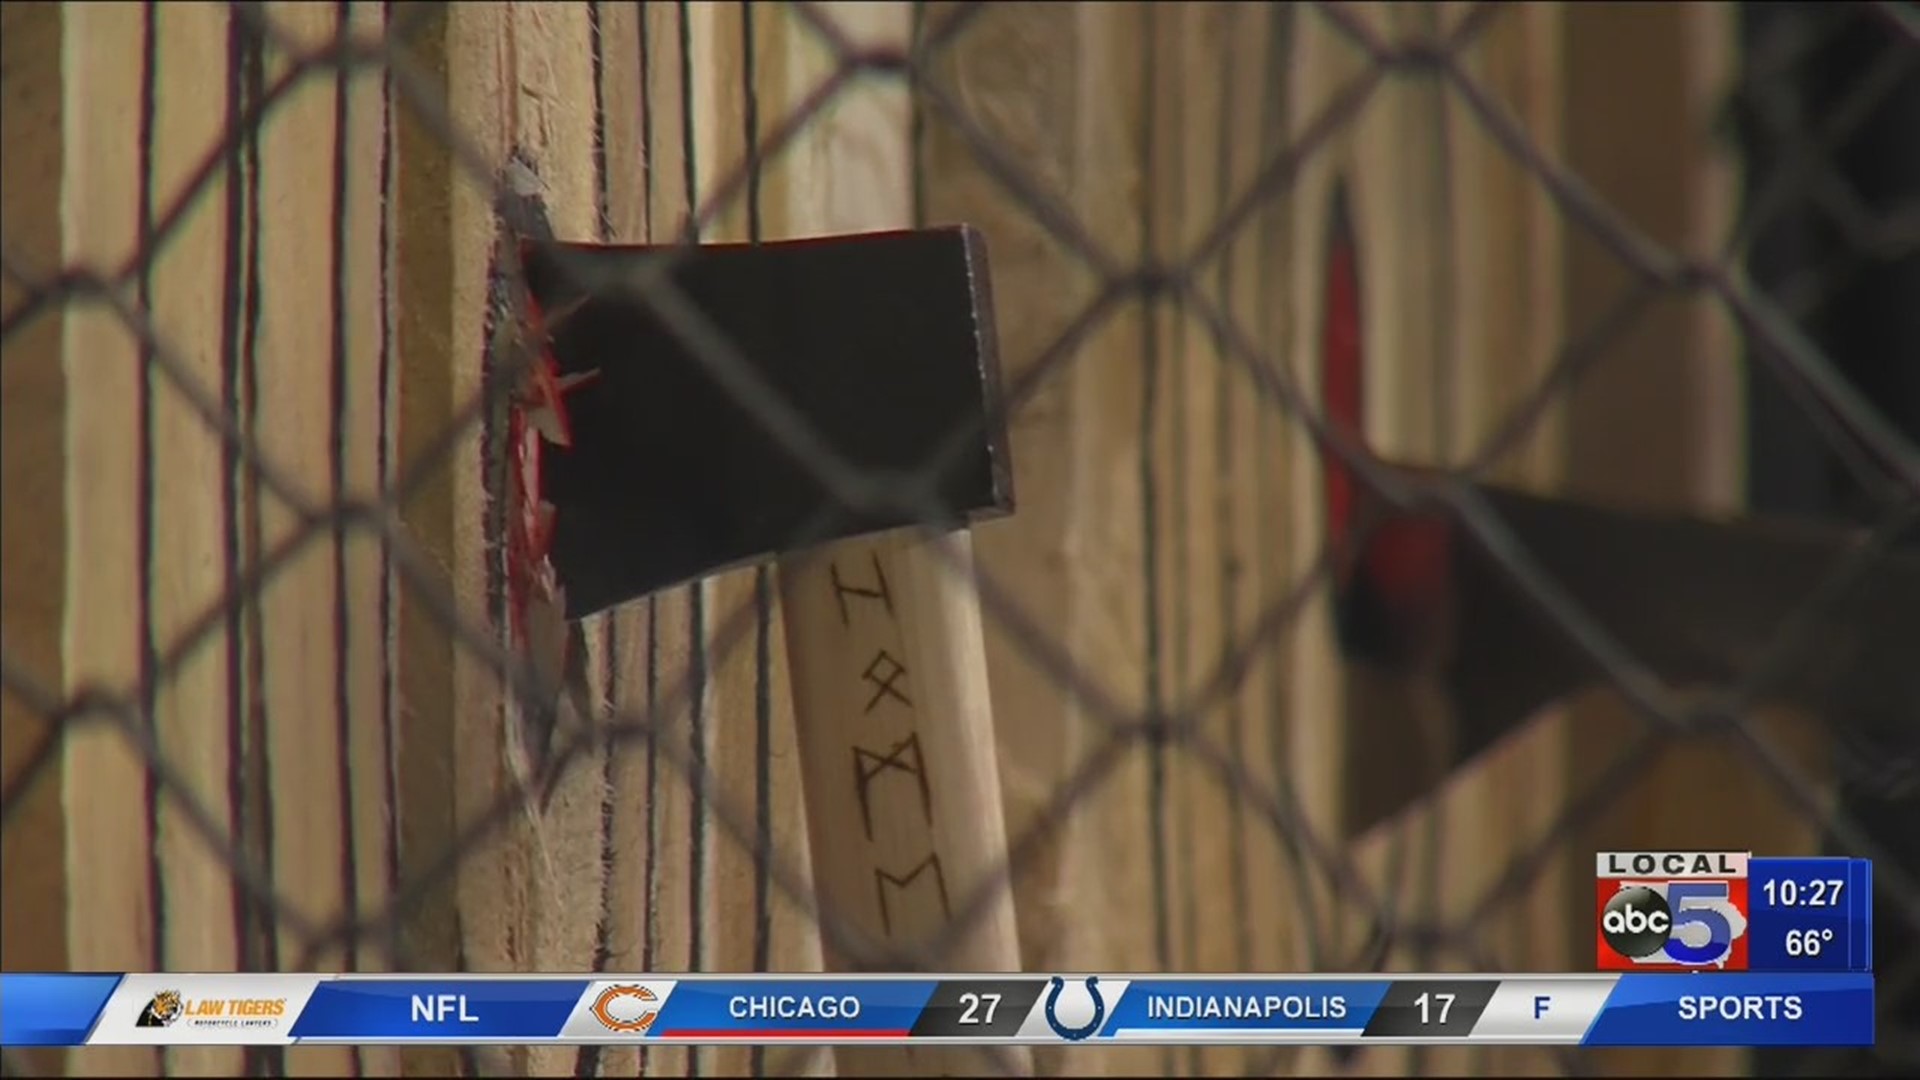 Axe Throwing U.S. Open comes to Des Moines